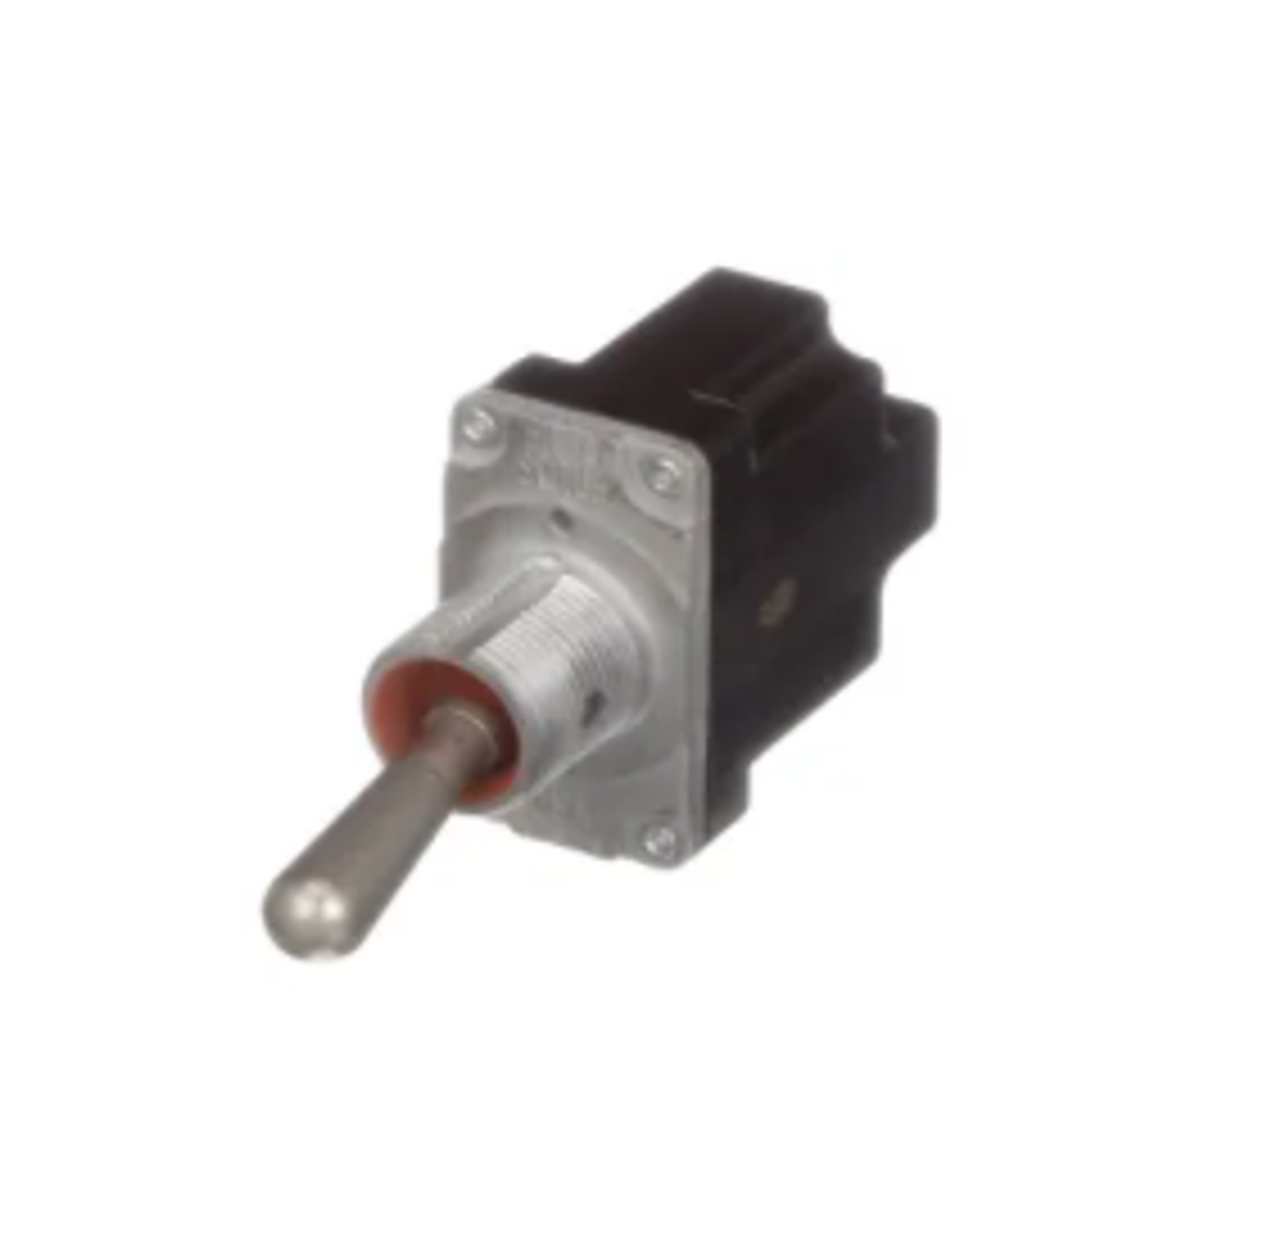 Honeywell / Microswitch 1TL1-3 Toggle Switches